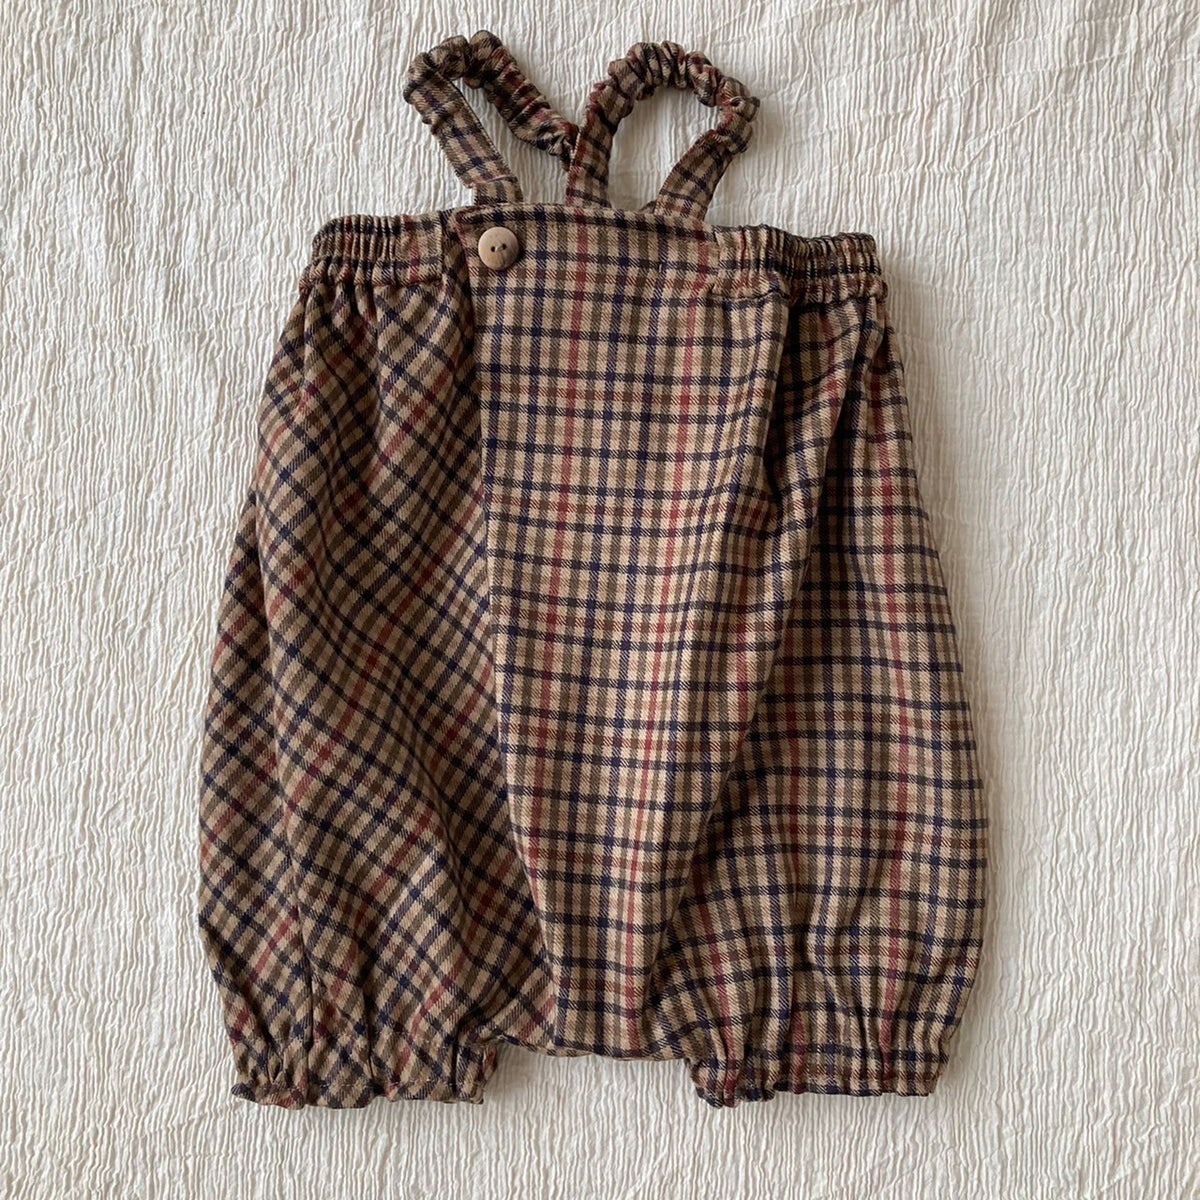 30% Dalston bloomers, camel check – Hello Lupo